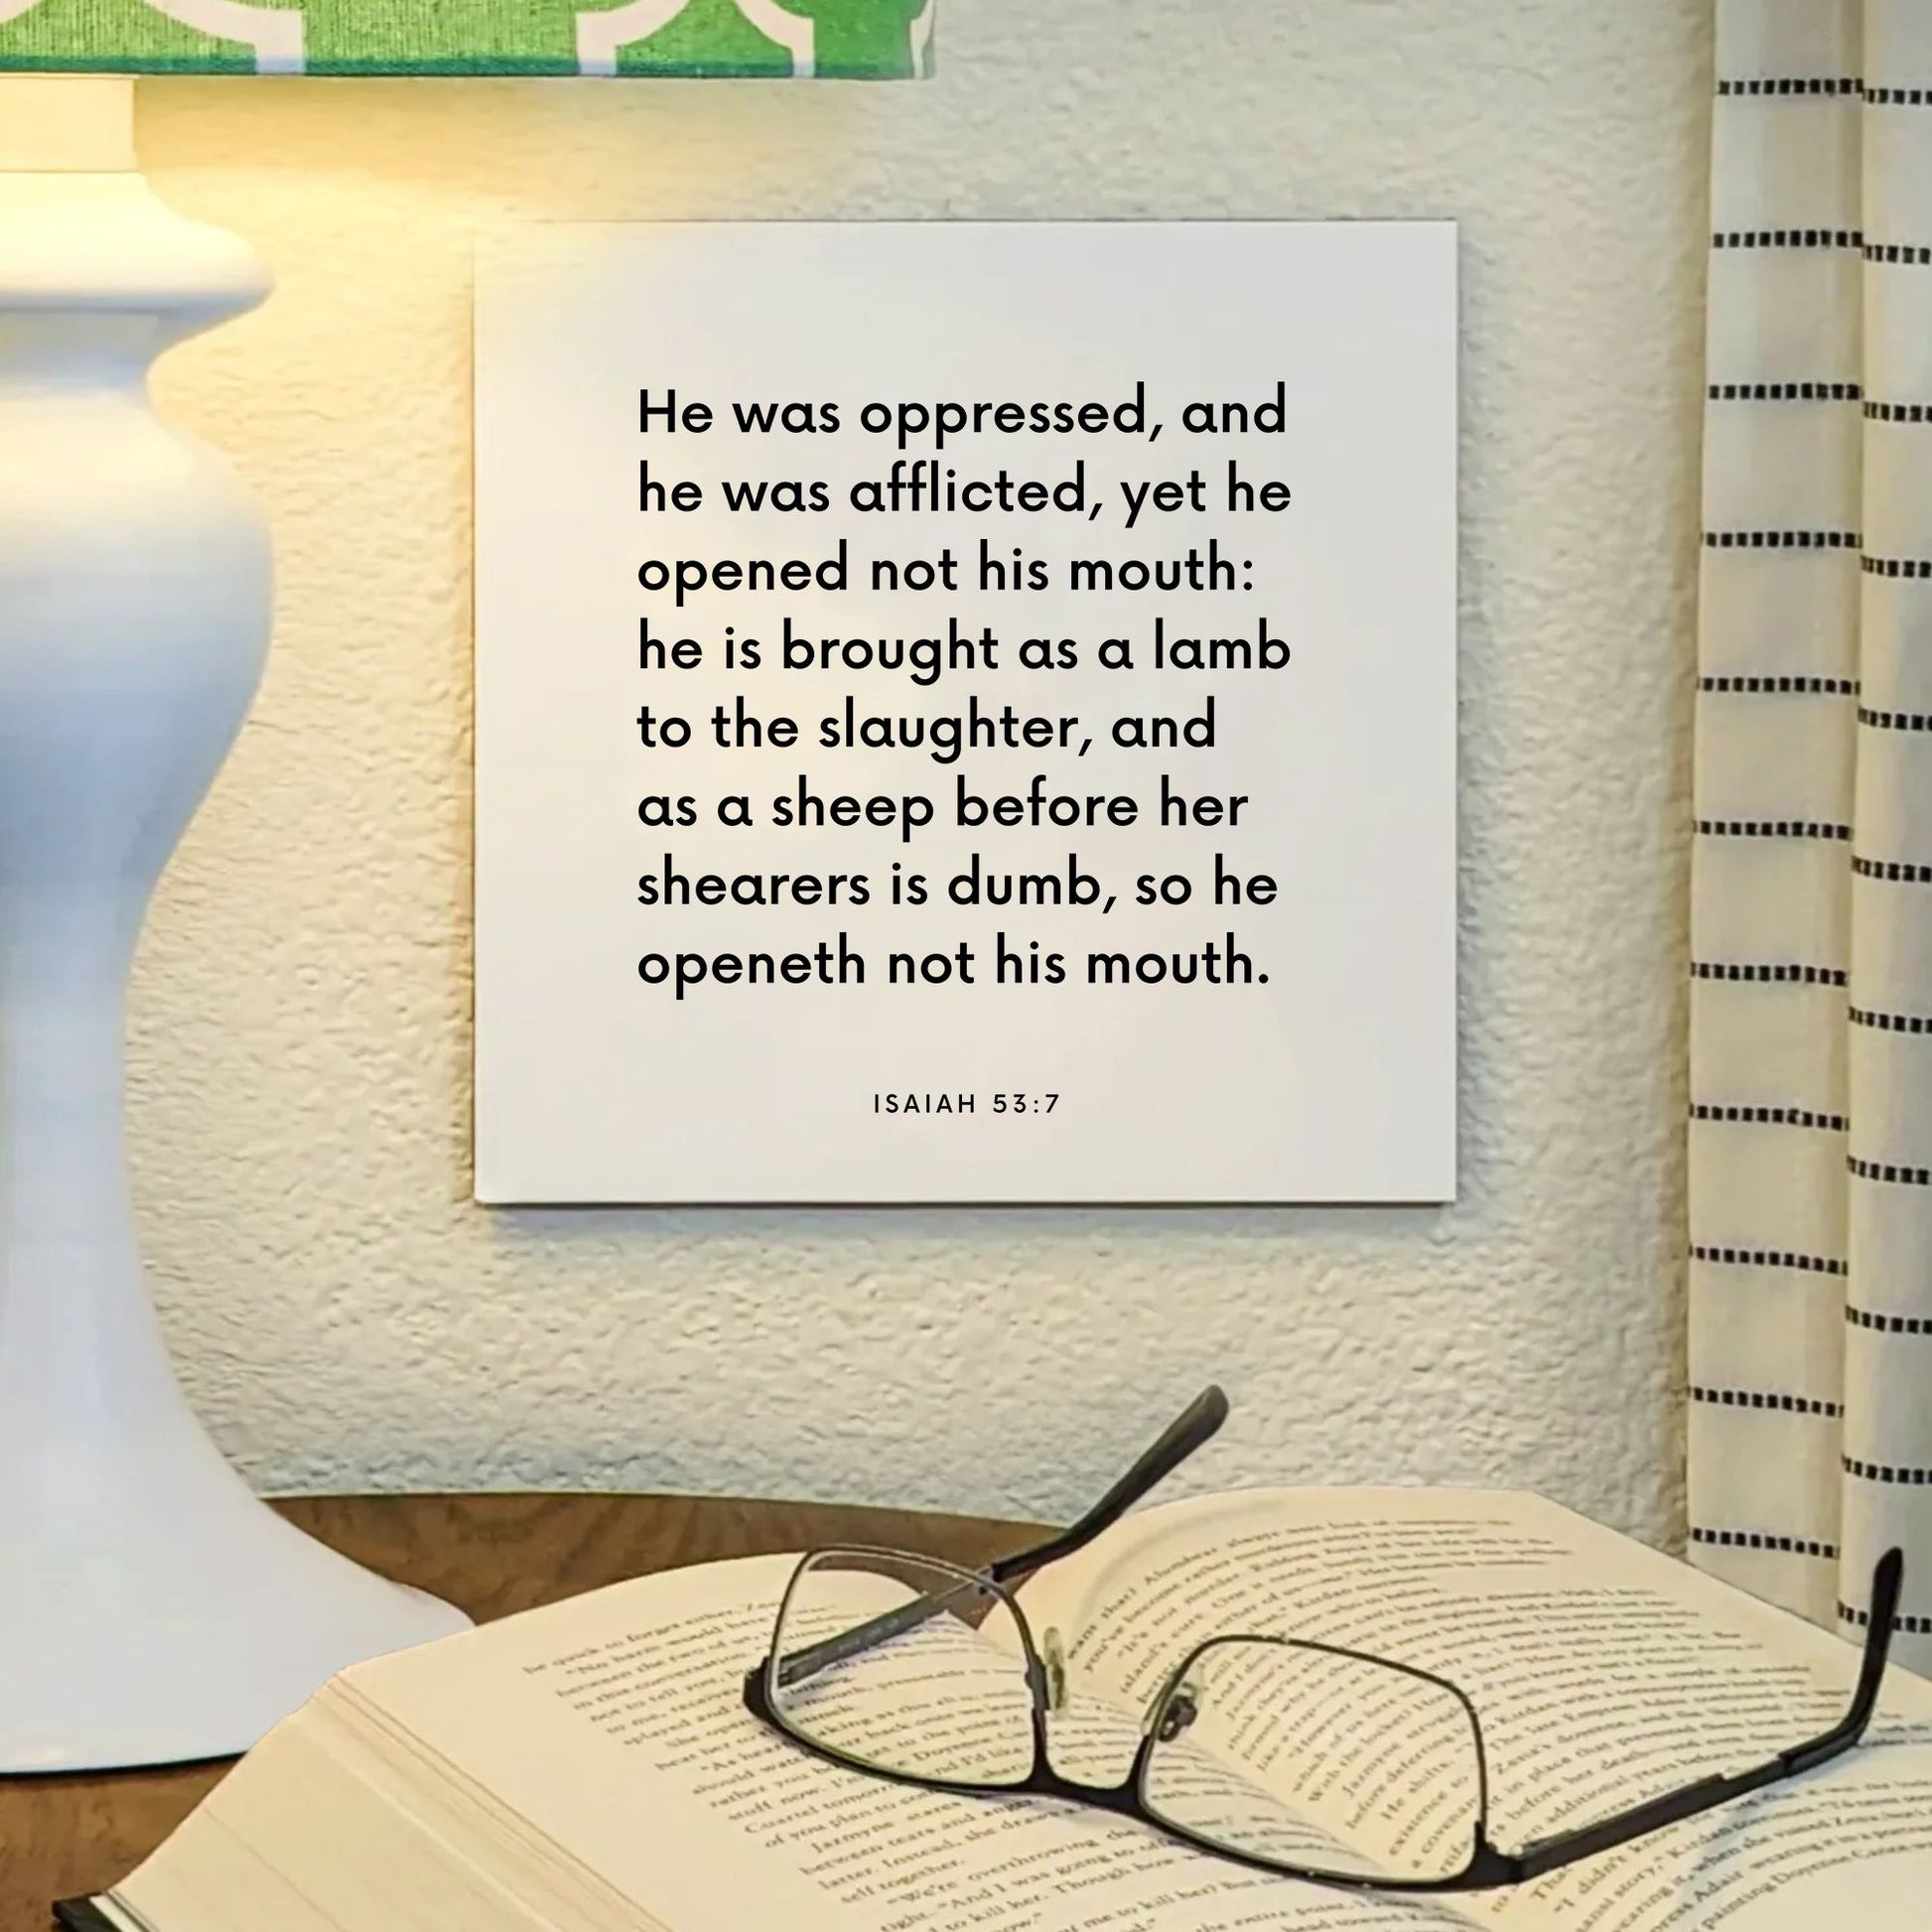 Lamp mouting of the scripture tile for Isaiah 53:7 - "He is brought as a lamb to the slaughter"